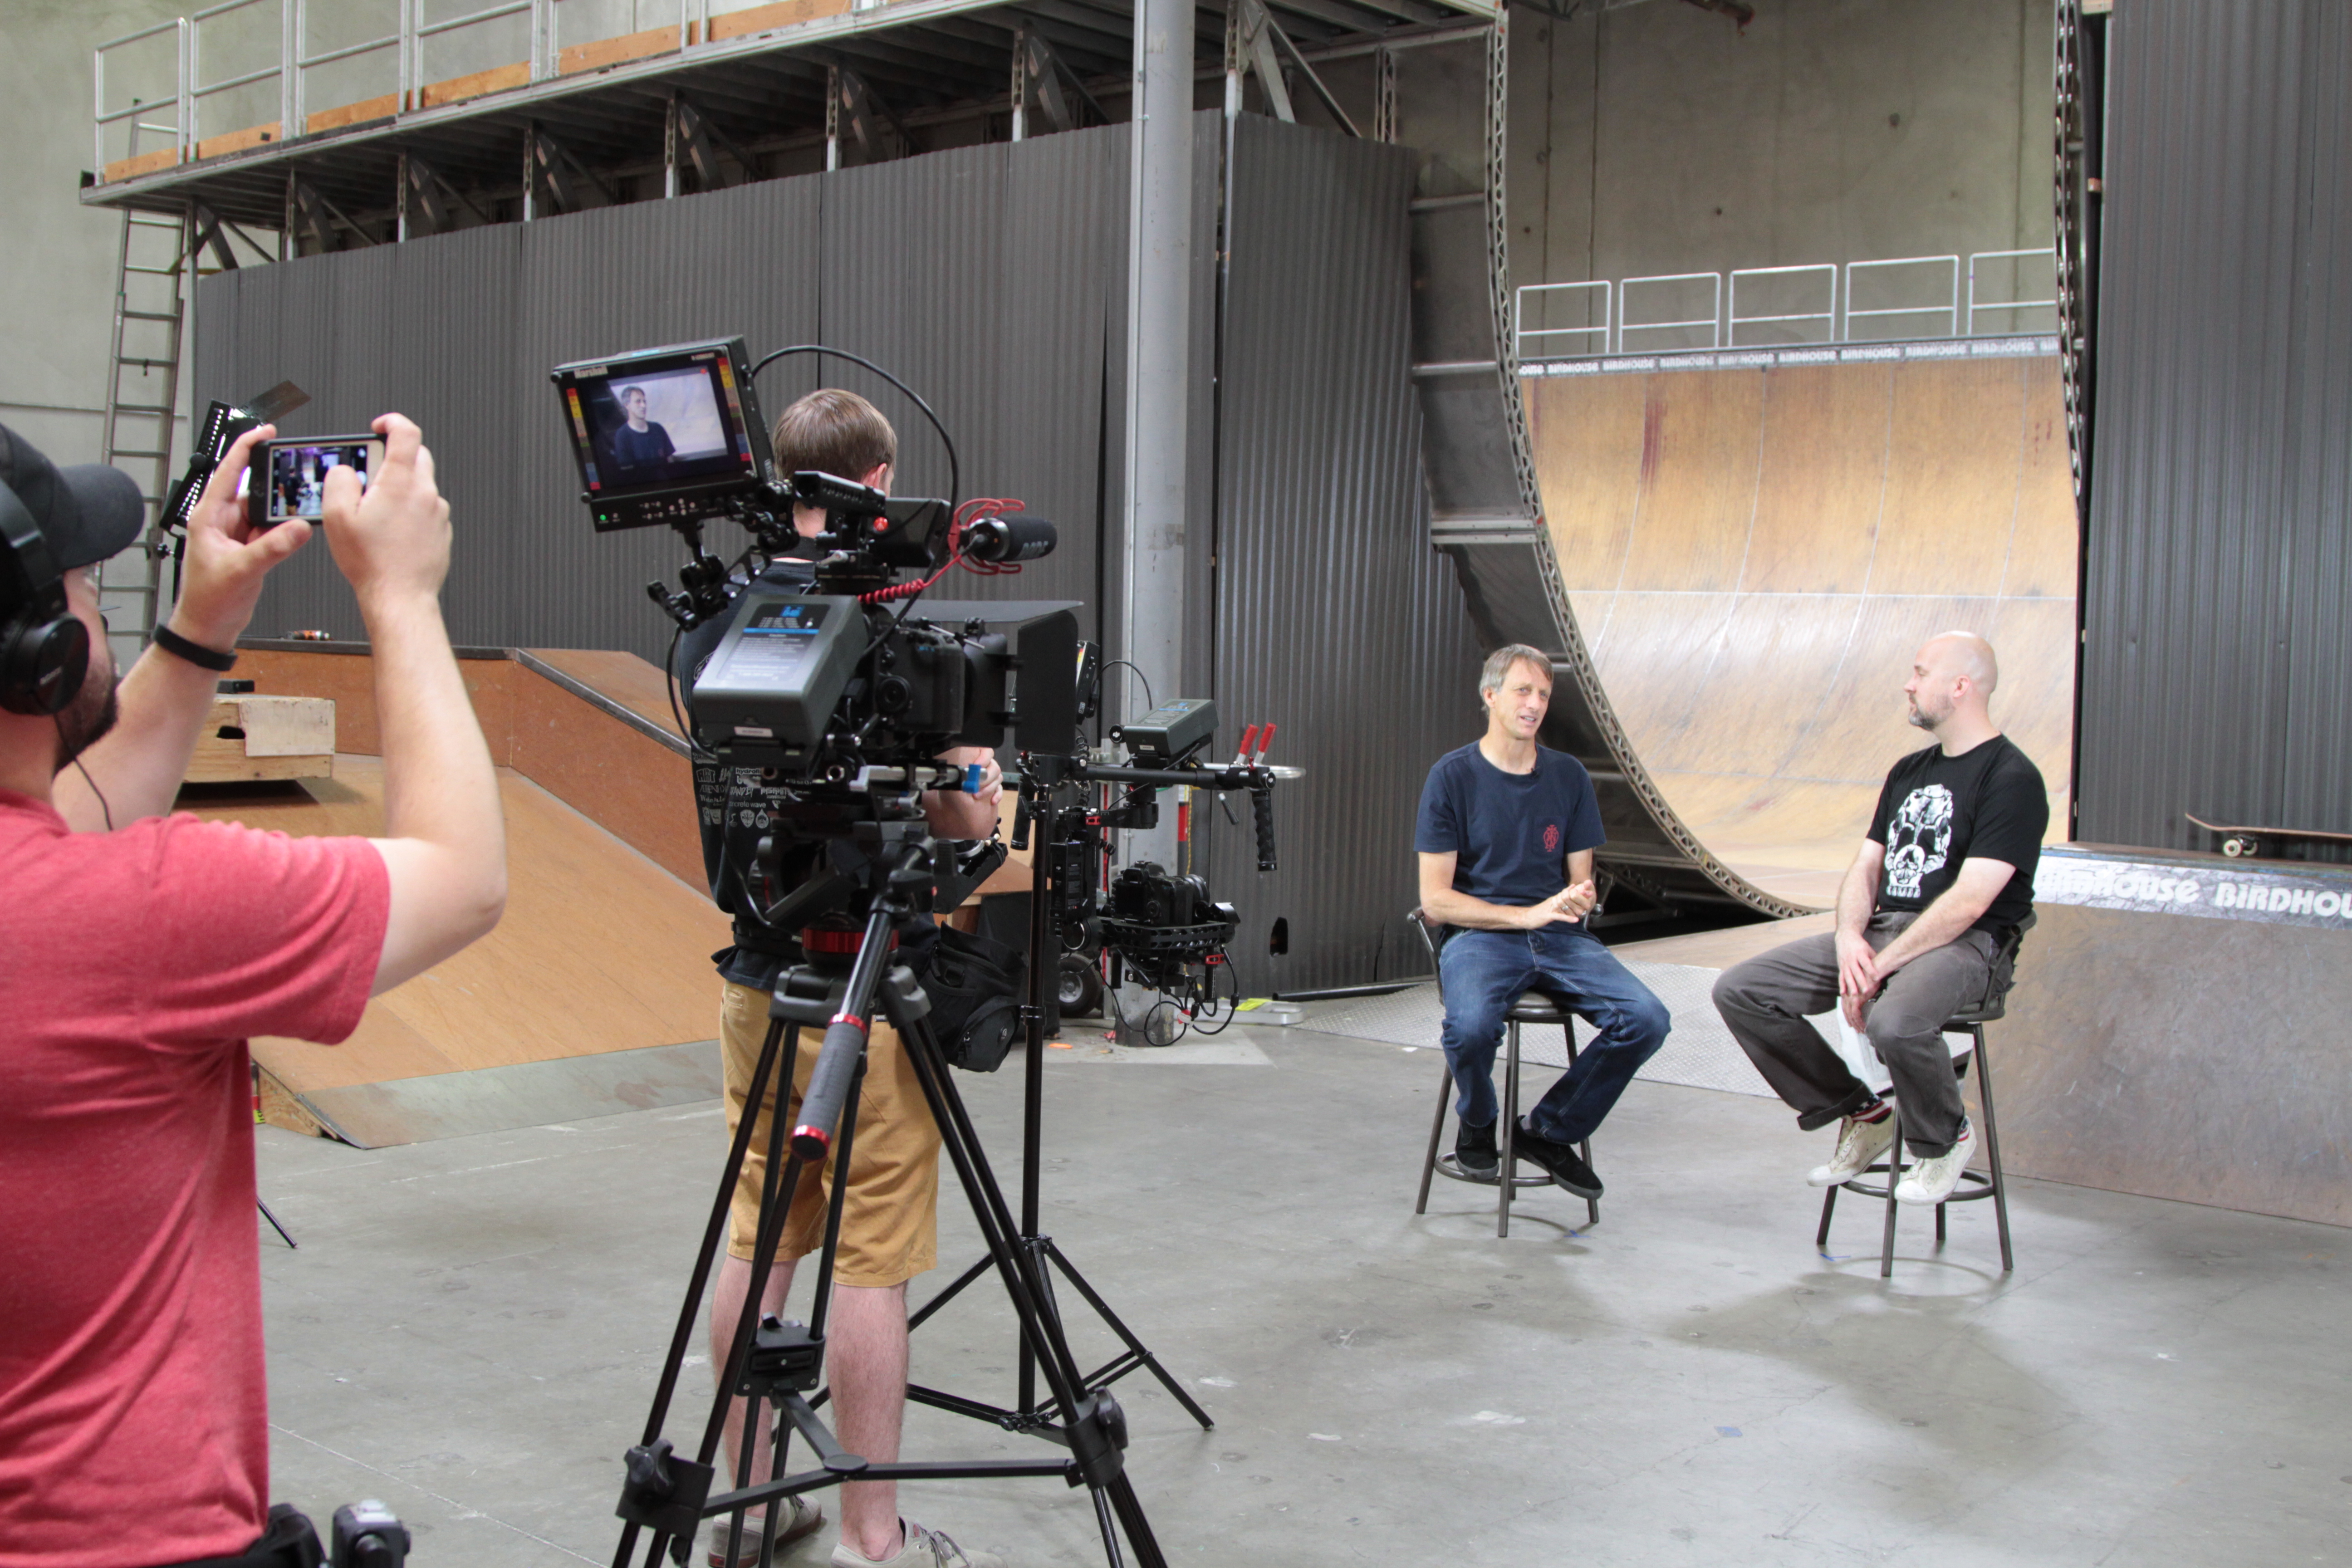 Tony Hawk discusses his career and gaming franchise with Director Jeremy Snead